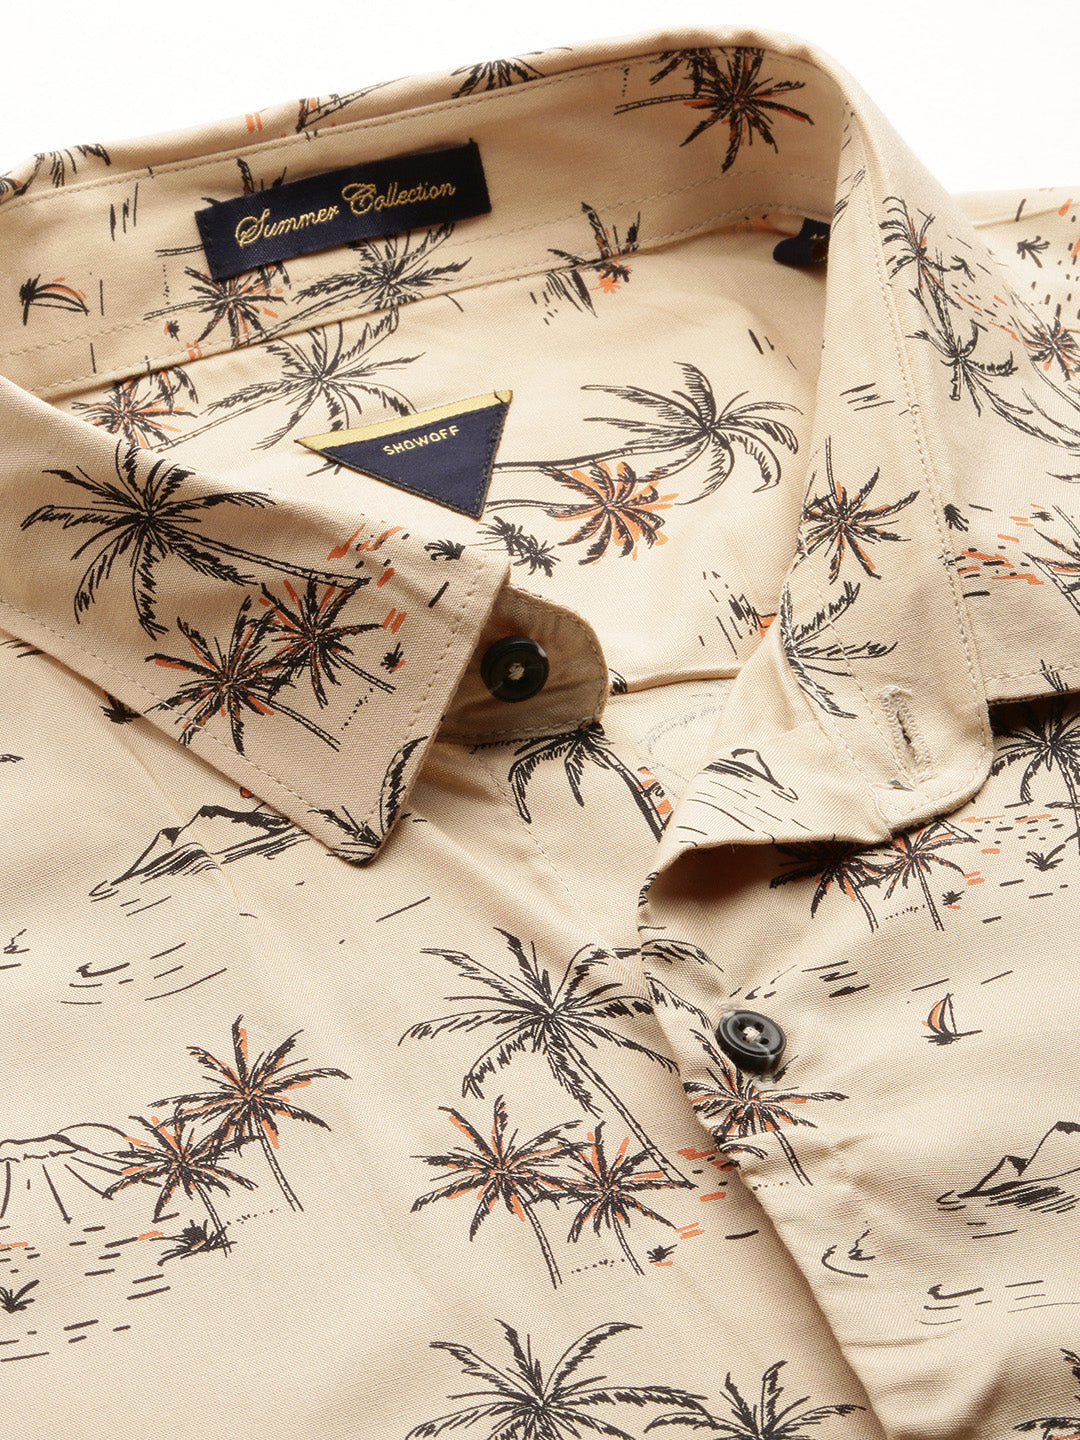 Men Beige Floral Casual Casual Shirts